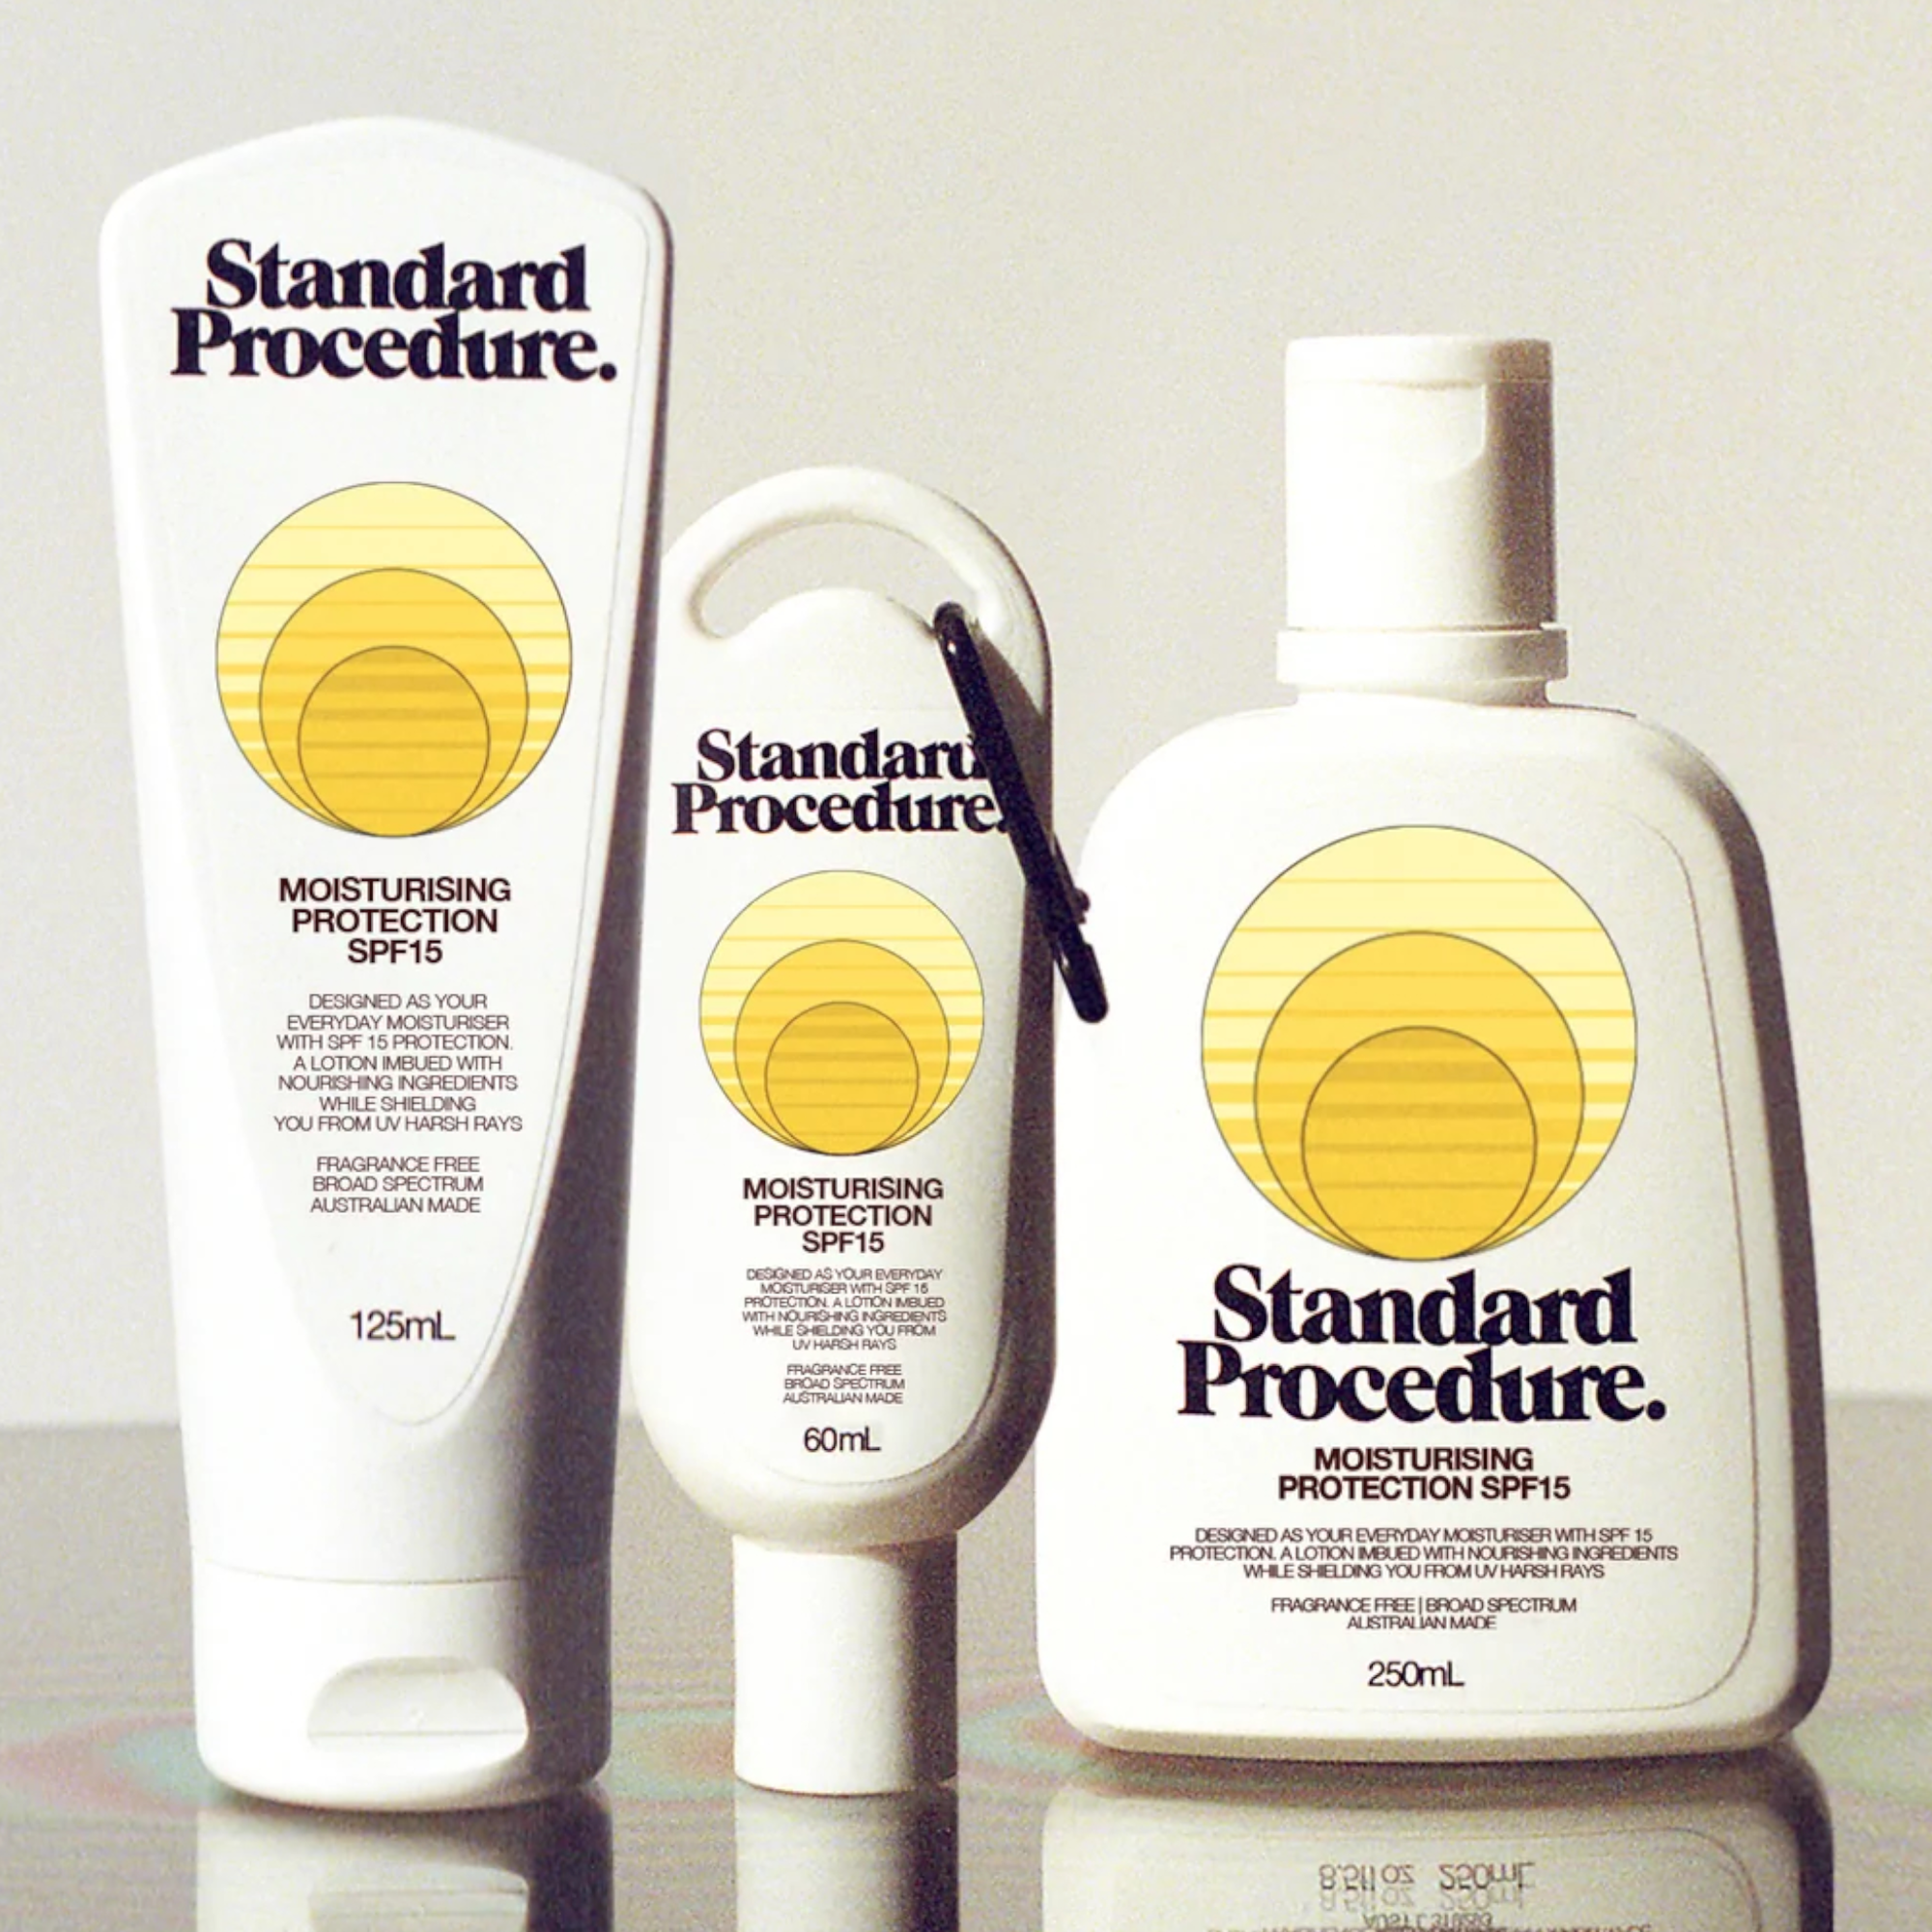 MOISTURISING PROTECTION SPF15 60ML Moisturising protection SPF15 60ML by Standard Procedure.Born under the harsh Australian summer sun, Standard Procedure, is a range of Sun and Skin Care made to withstand the toughest elements. Inspired by the sun-kissed days of bygone eras; the surf explorations of Australia’s magical coastlines, the long haired beach boys and bronzed bikini-clad women, Standard Procedure have come to bring Australian surf nostalgia back to life in a brand new way.Locally owned, grown, fa